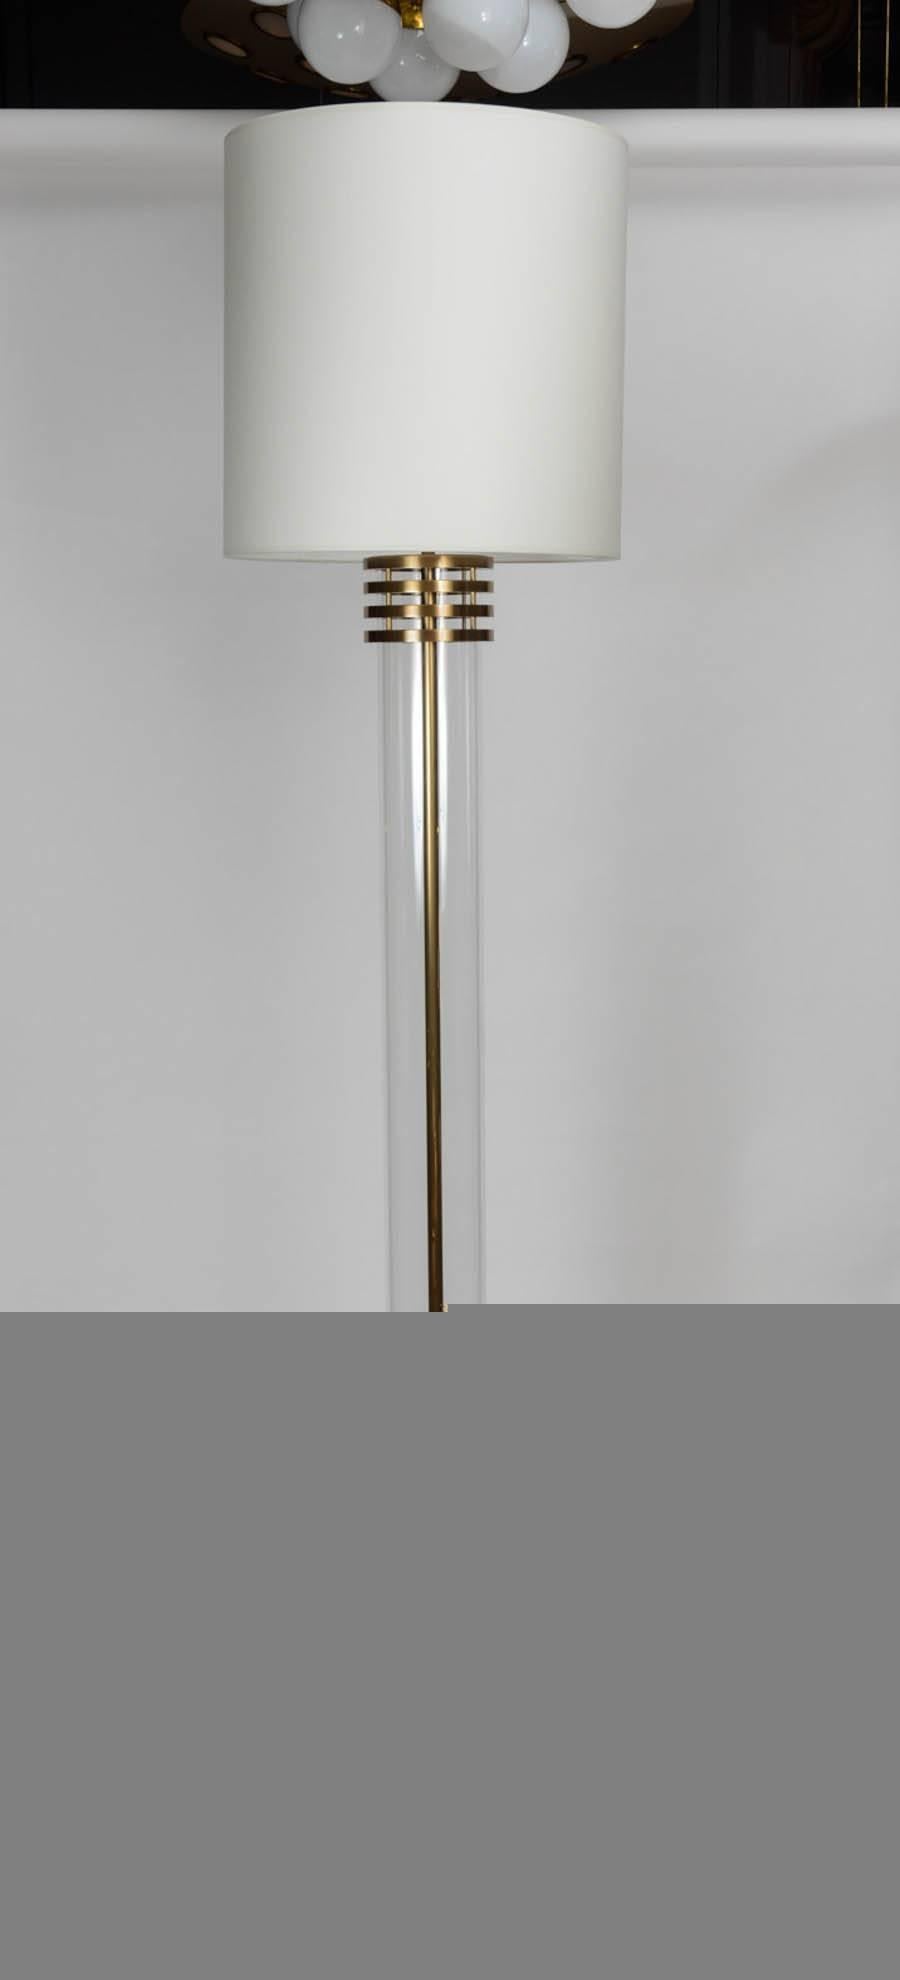 Elegant pair of floor lamps made of patinated bronze and glass. Composed of square feet and bronze rings setting a tall glass tube for a revisited antic aspect. The height of the upper stem holding the lights is adjustable.

Two sources of light